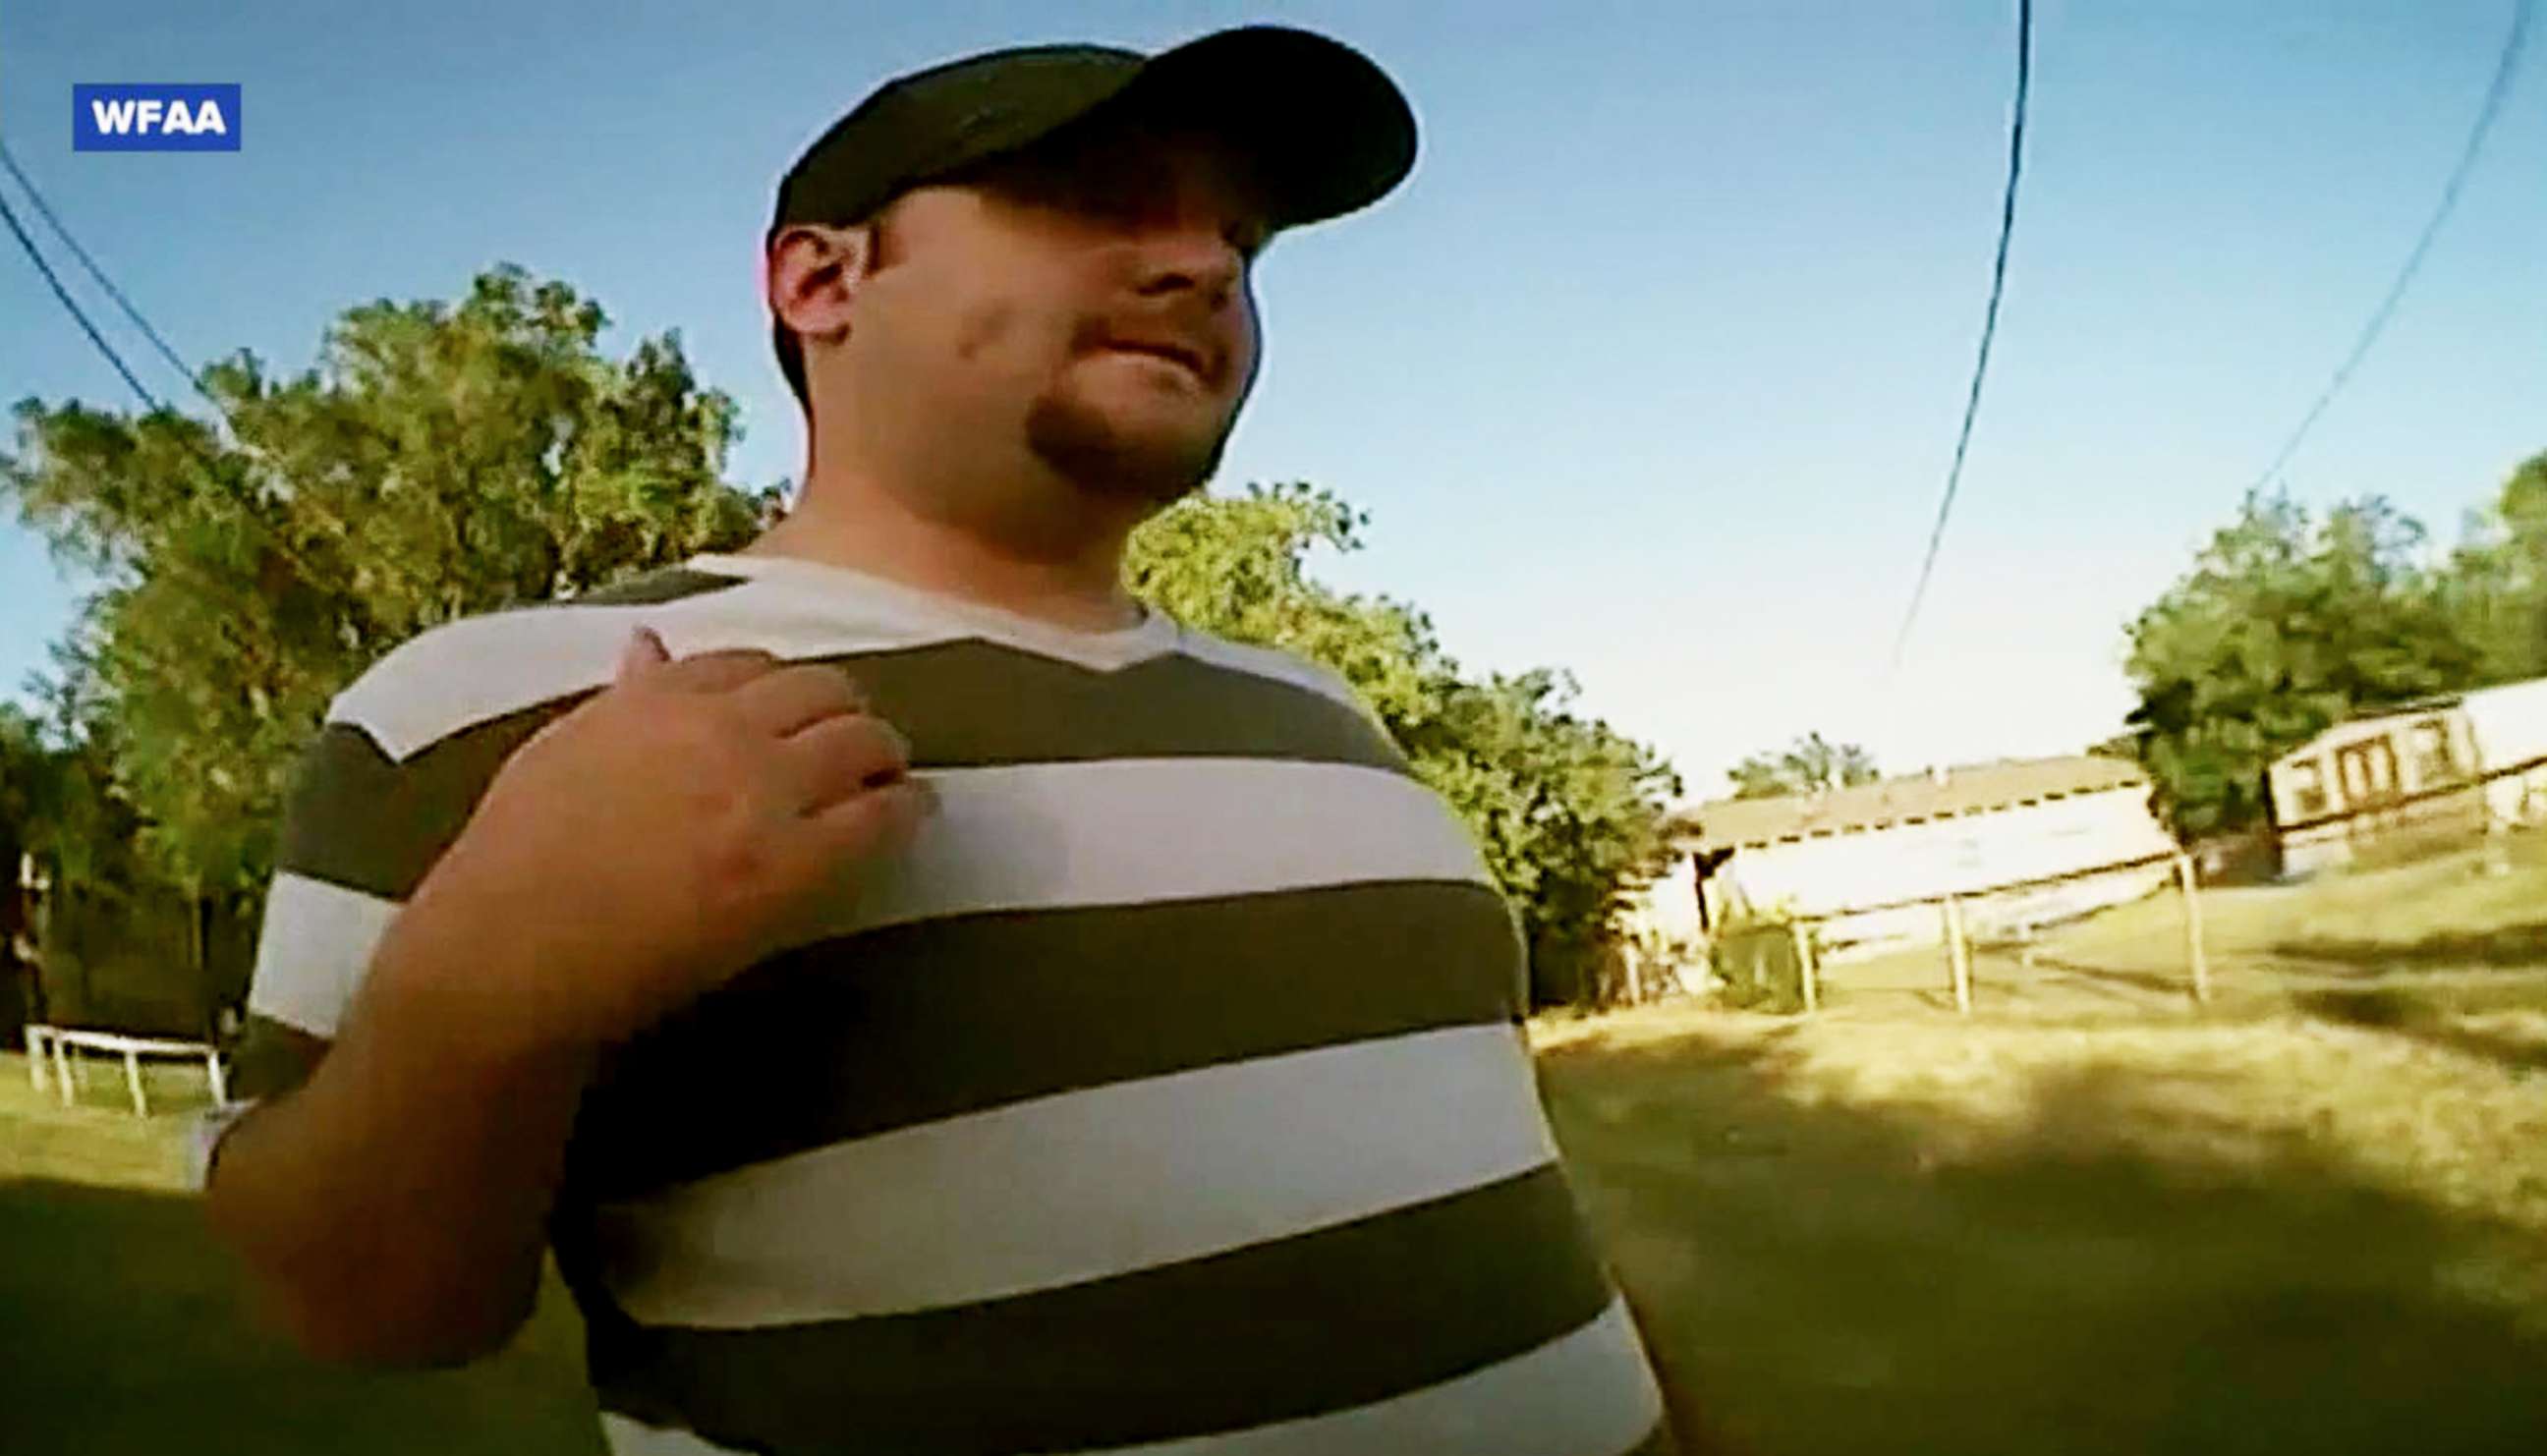 PHOTO: Neighbors called 911 because Michael Moore, pictured, was reportedly throwing rocks into their yard in Graham, Texas.